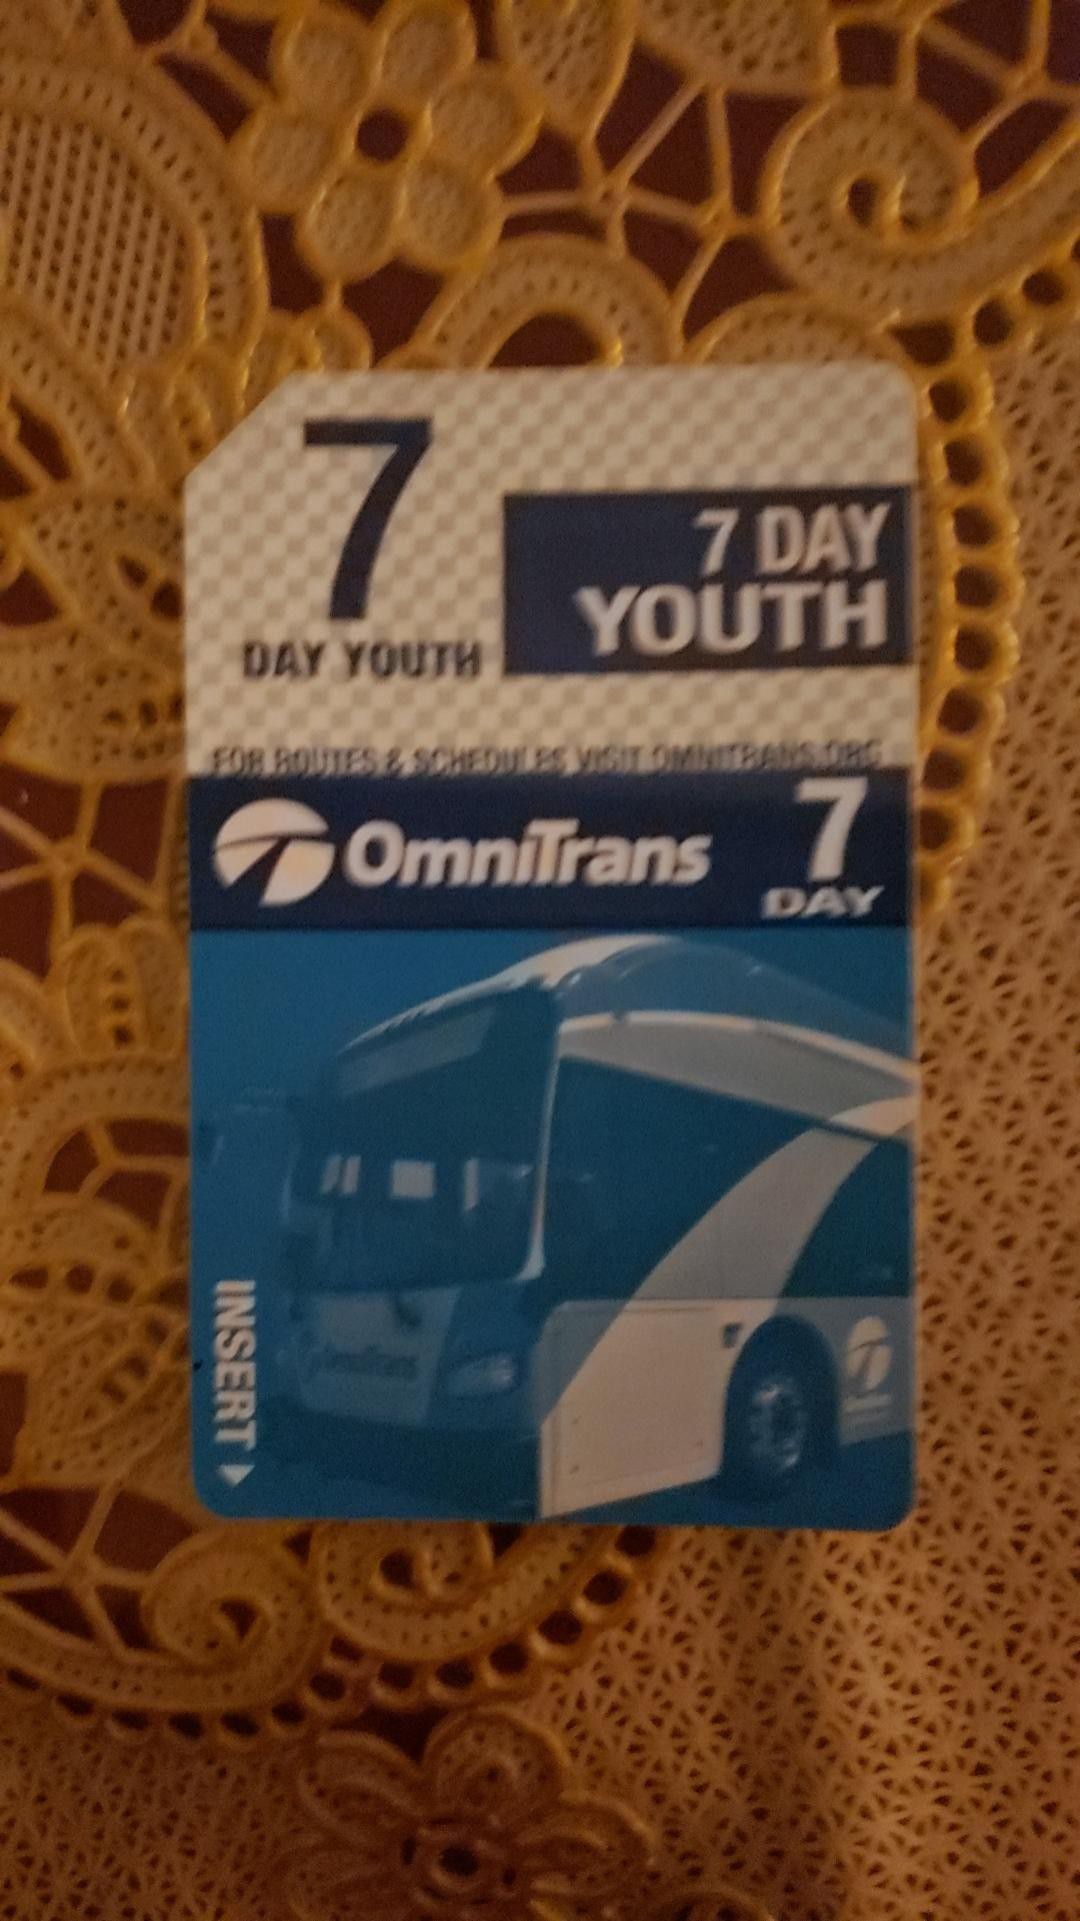 7 days youth bus pass